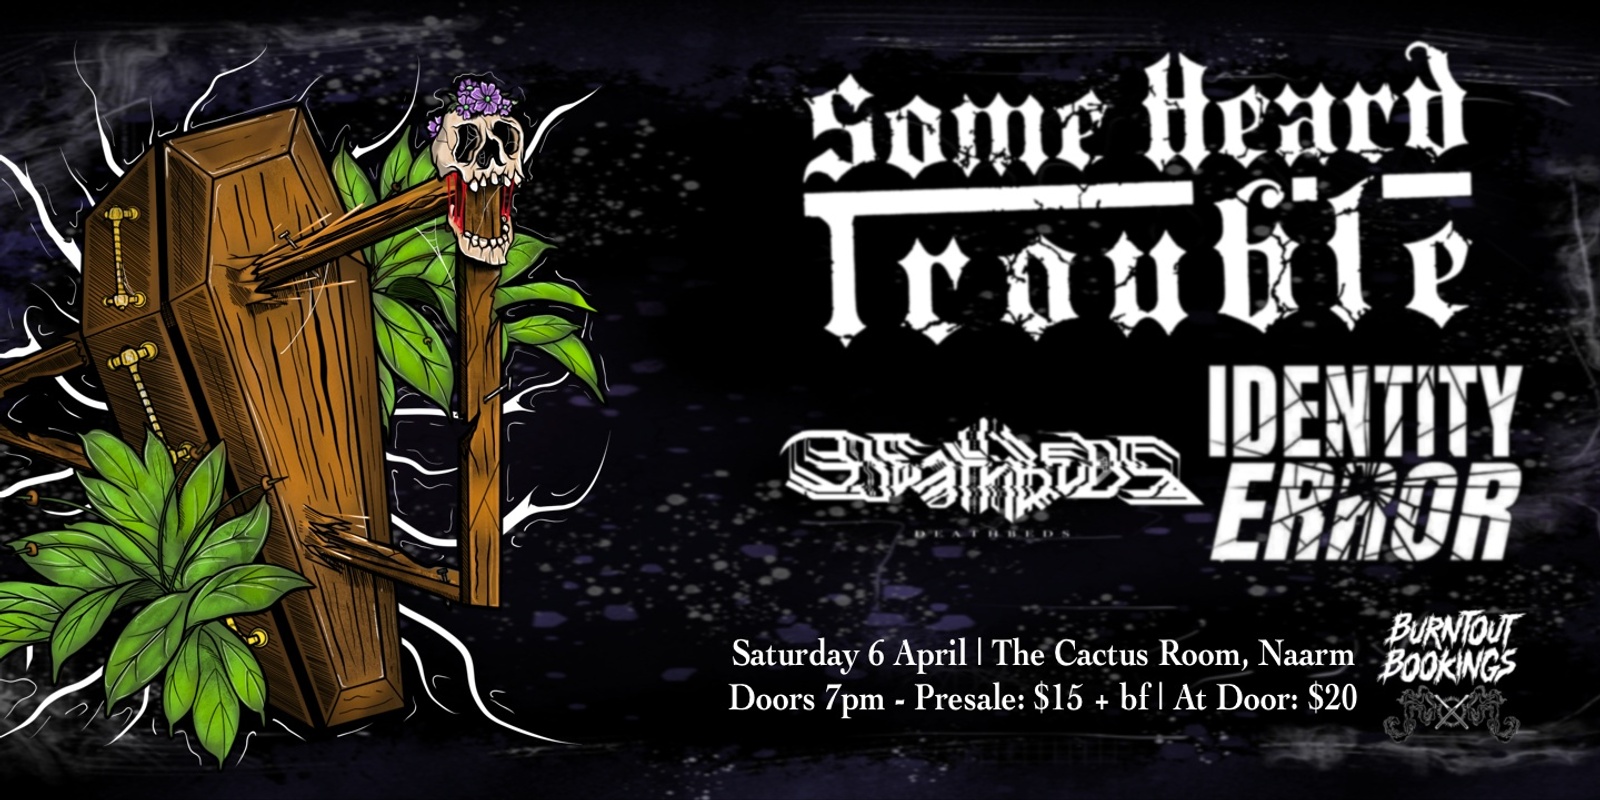 Banner image for Deathbeds / Some Heard Trouble co headliner - Melbourne